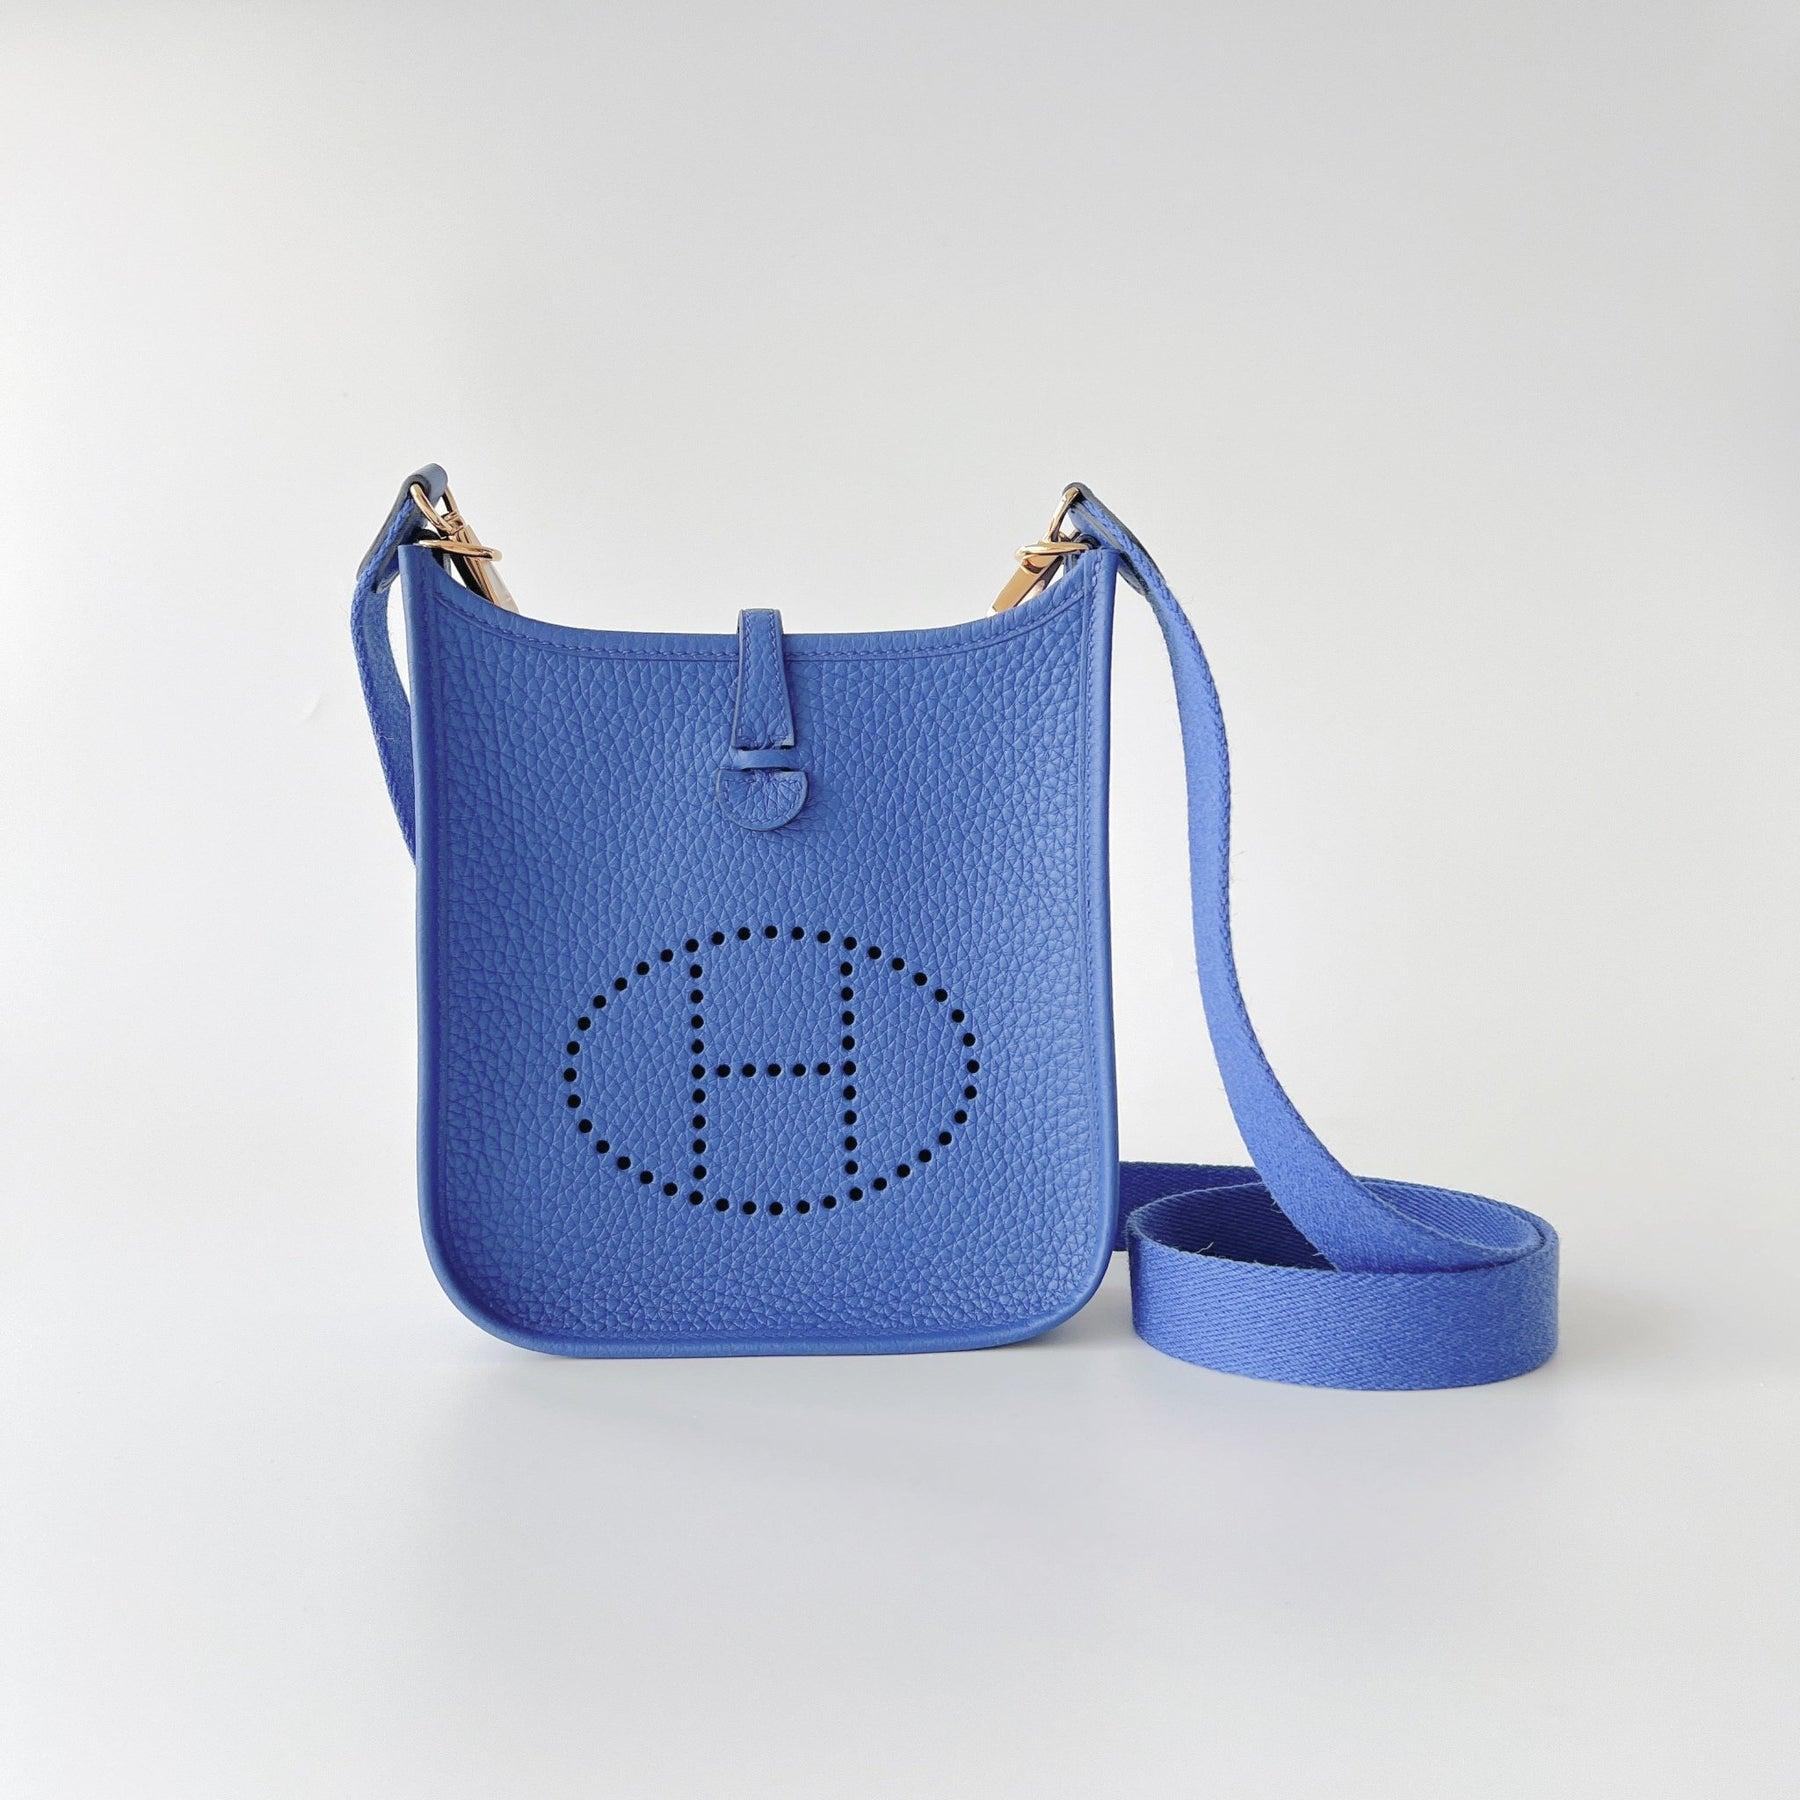 The Hermes Mini Evelyne 16 in Bleu Royal is a casual design that can be used for your everyday routine. This is the smallest size Hermes Evelyne bag and is made from handcrafted Royal Blue Clemence leather, making it harder to scratch or become